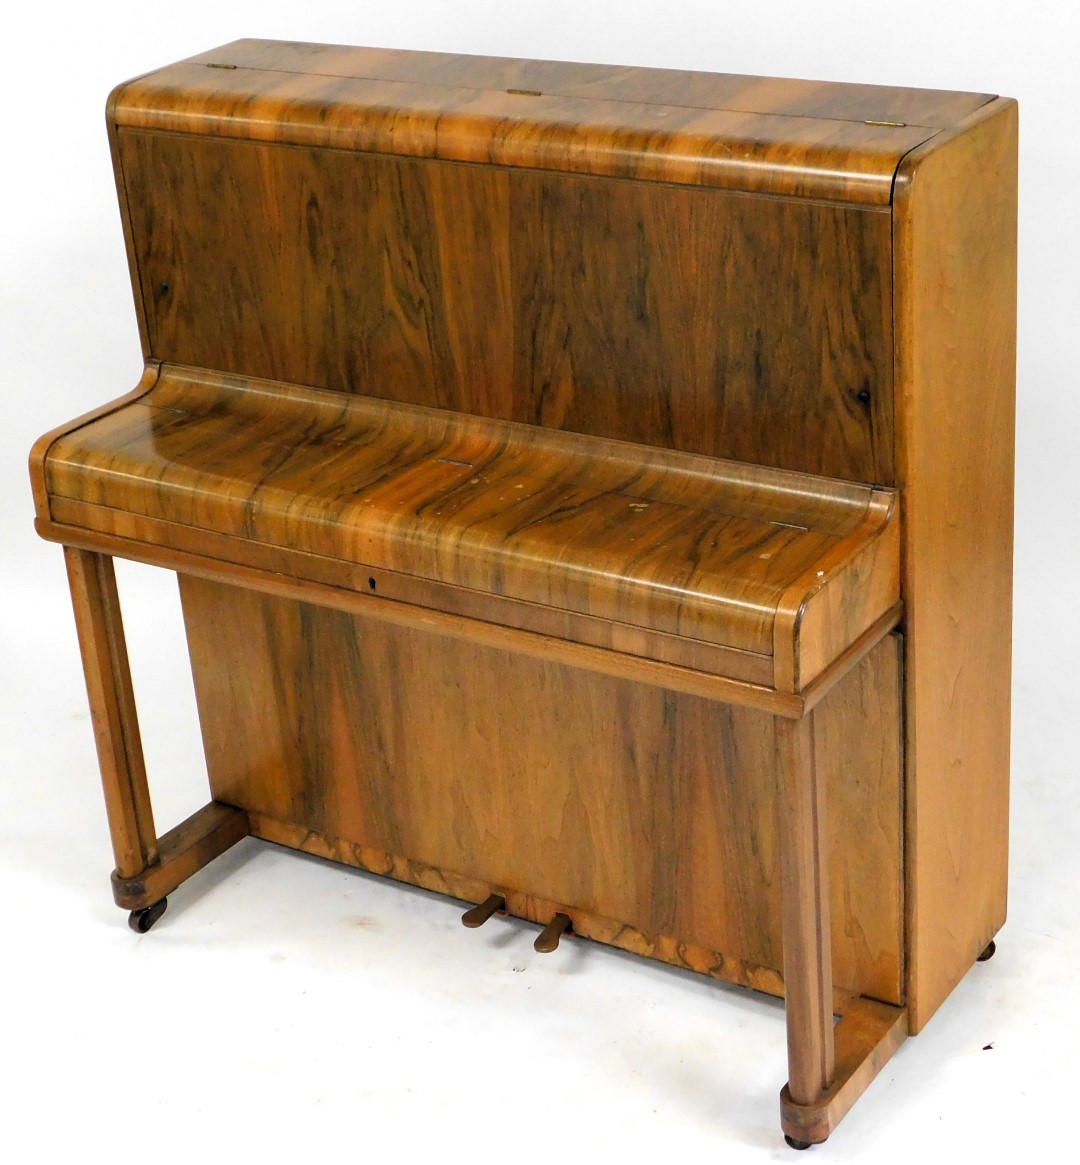 A small walnut upright piano, label for Cestrian model, Herbert Ellis, Chester, with simulated ivory - Image 3 of 4